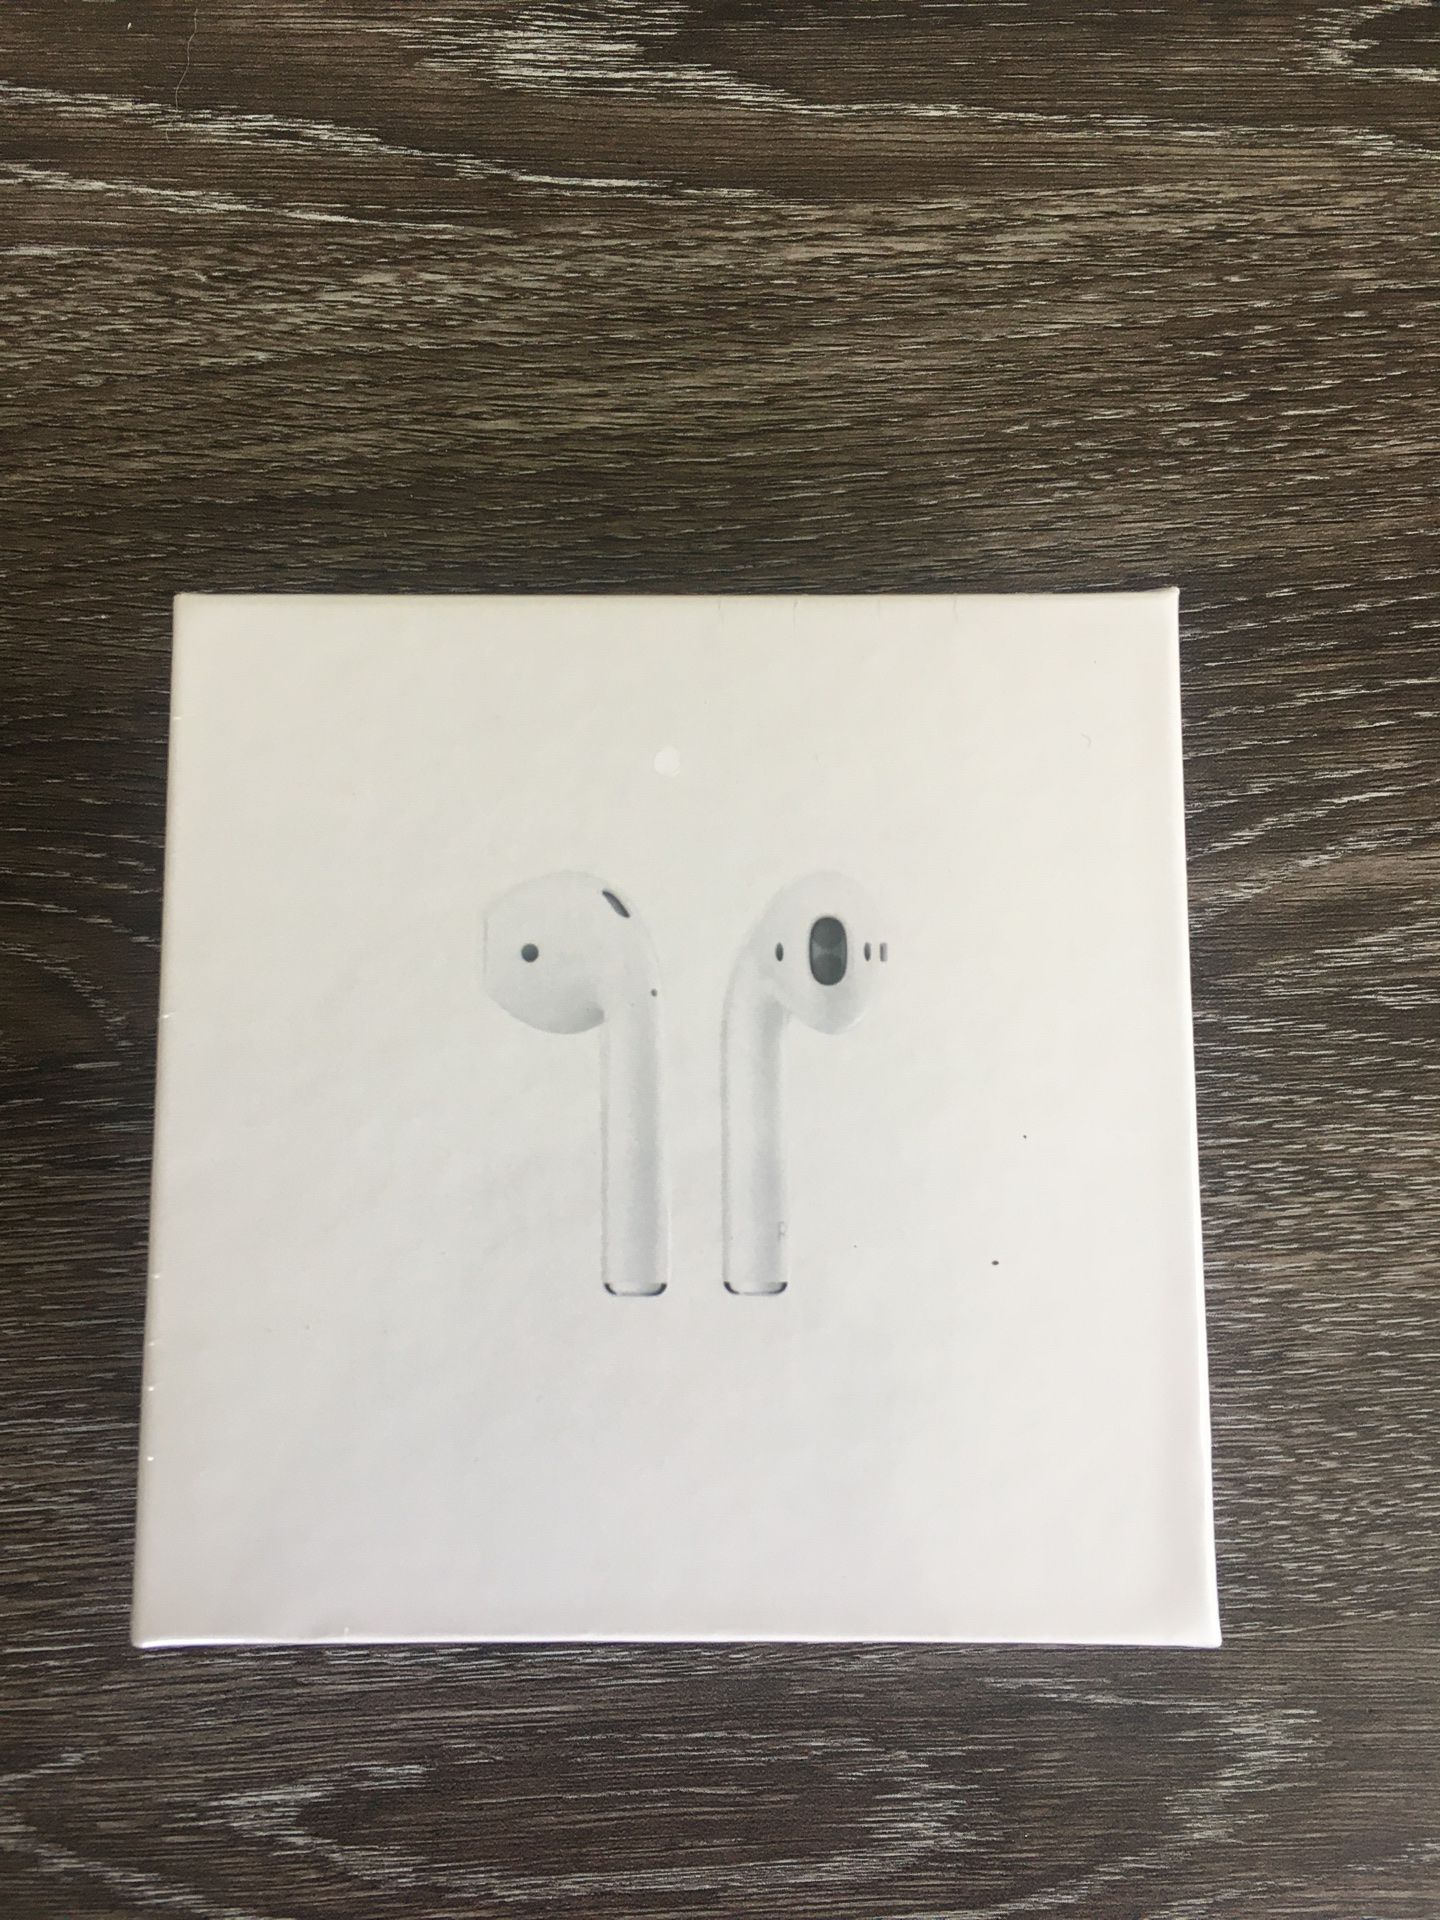 Brand new Apple AirPods Generation 2